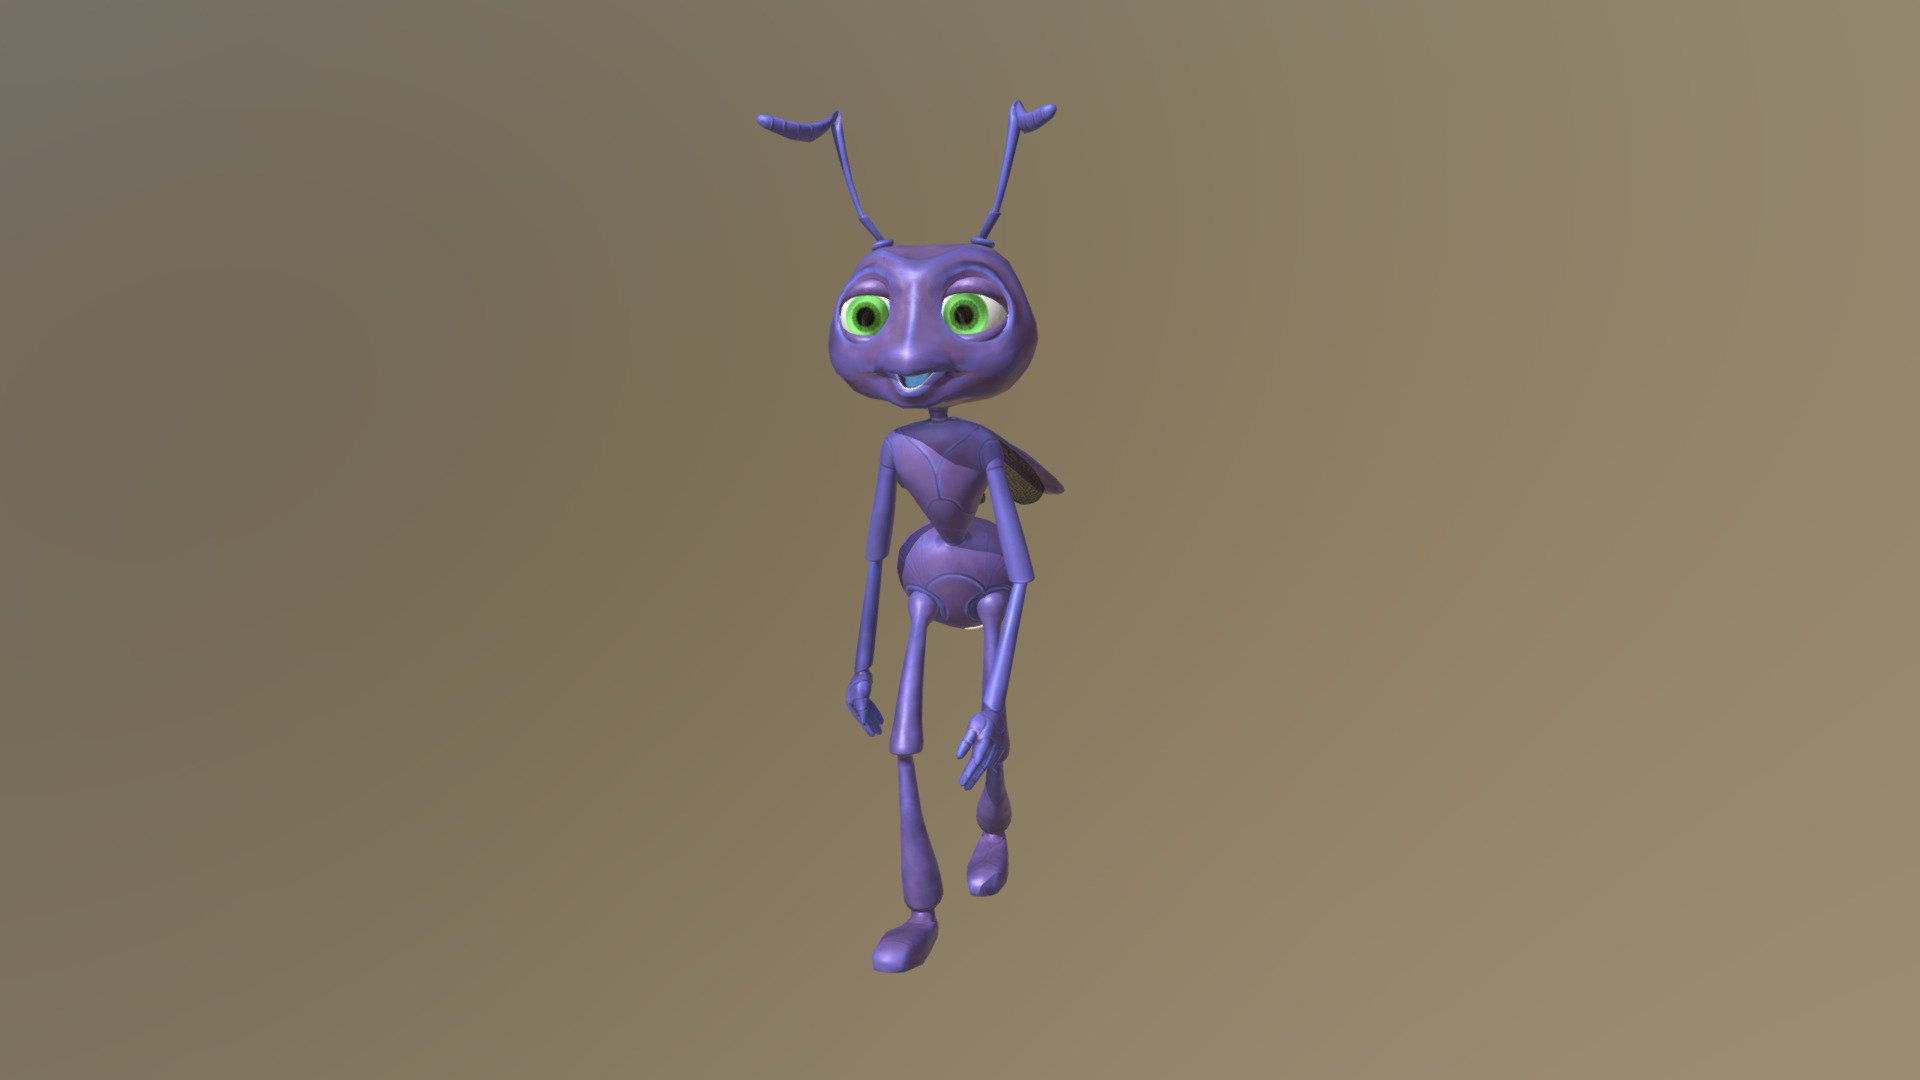 Pixar inspired avatar for use in HighFidelity and VRChat social VR envrionments - custom bones on the wings and antenna with simulaton properties 3d model